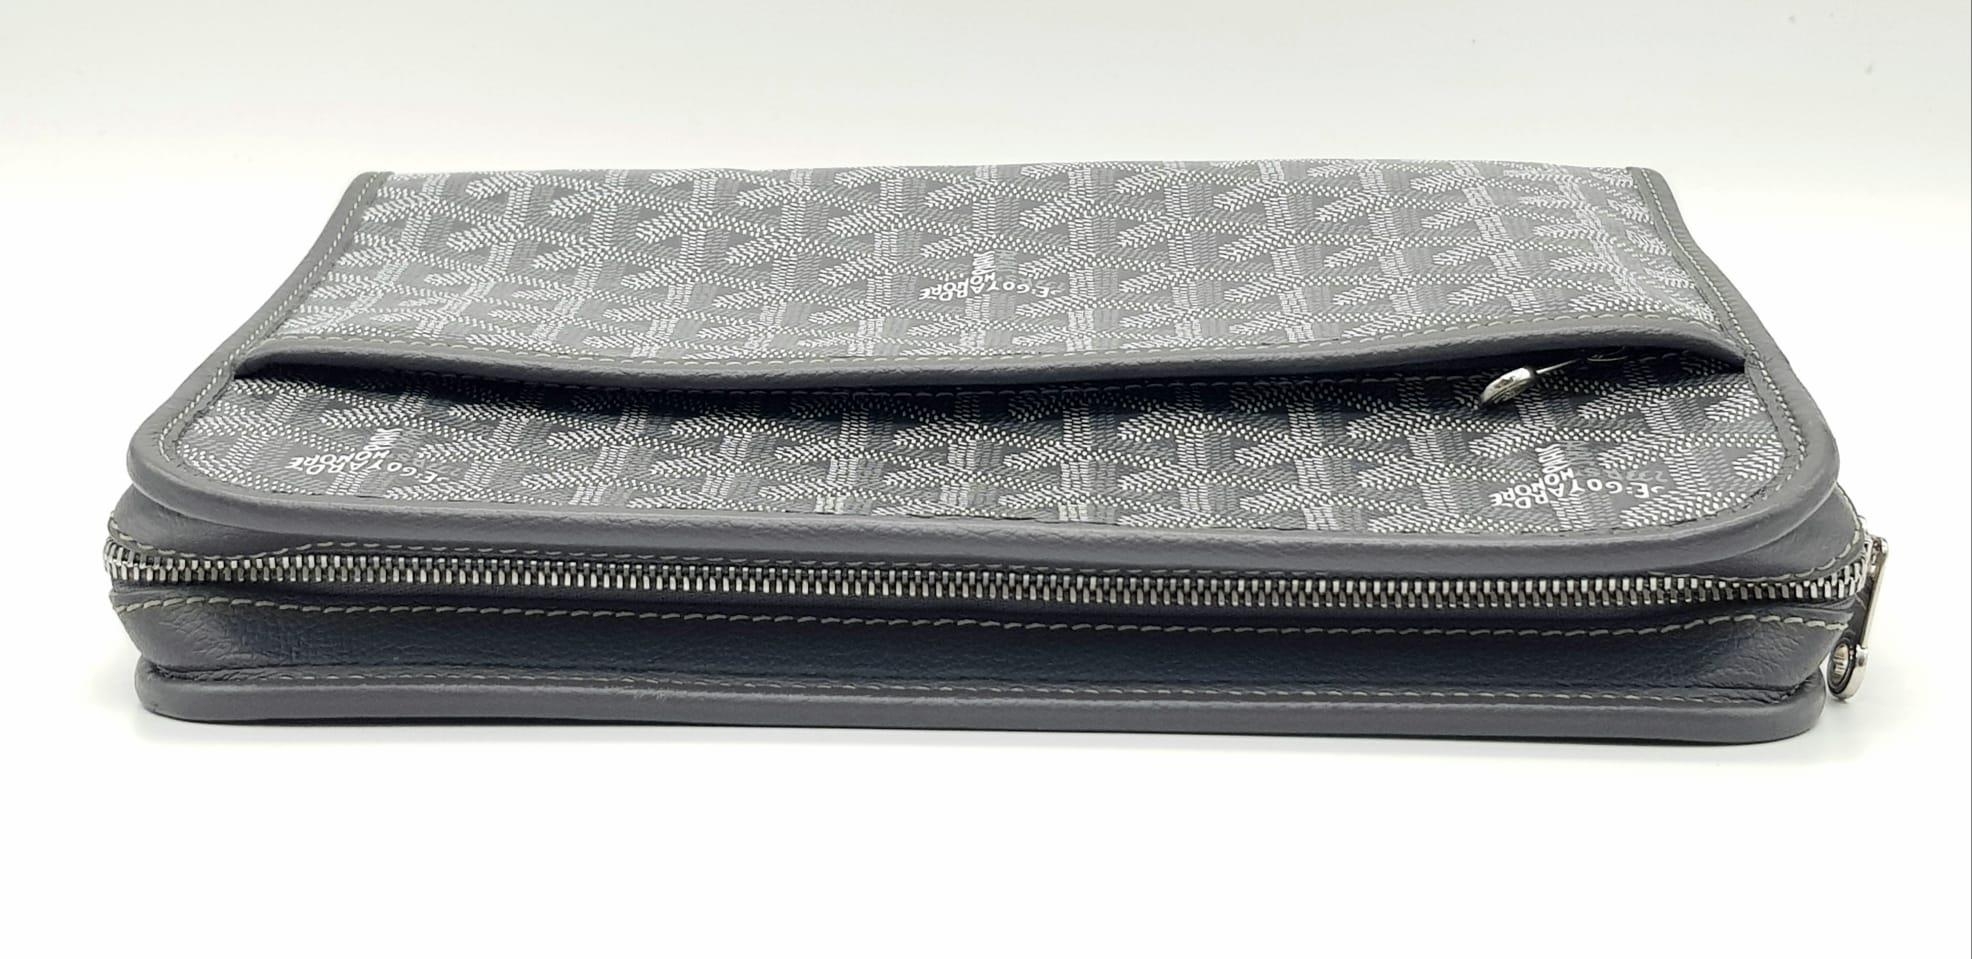 A Goyard Jouvence Grey Washbag. Grey and white geometric pattern on canvas. Water resistant inner - Image 5 of 8